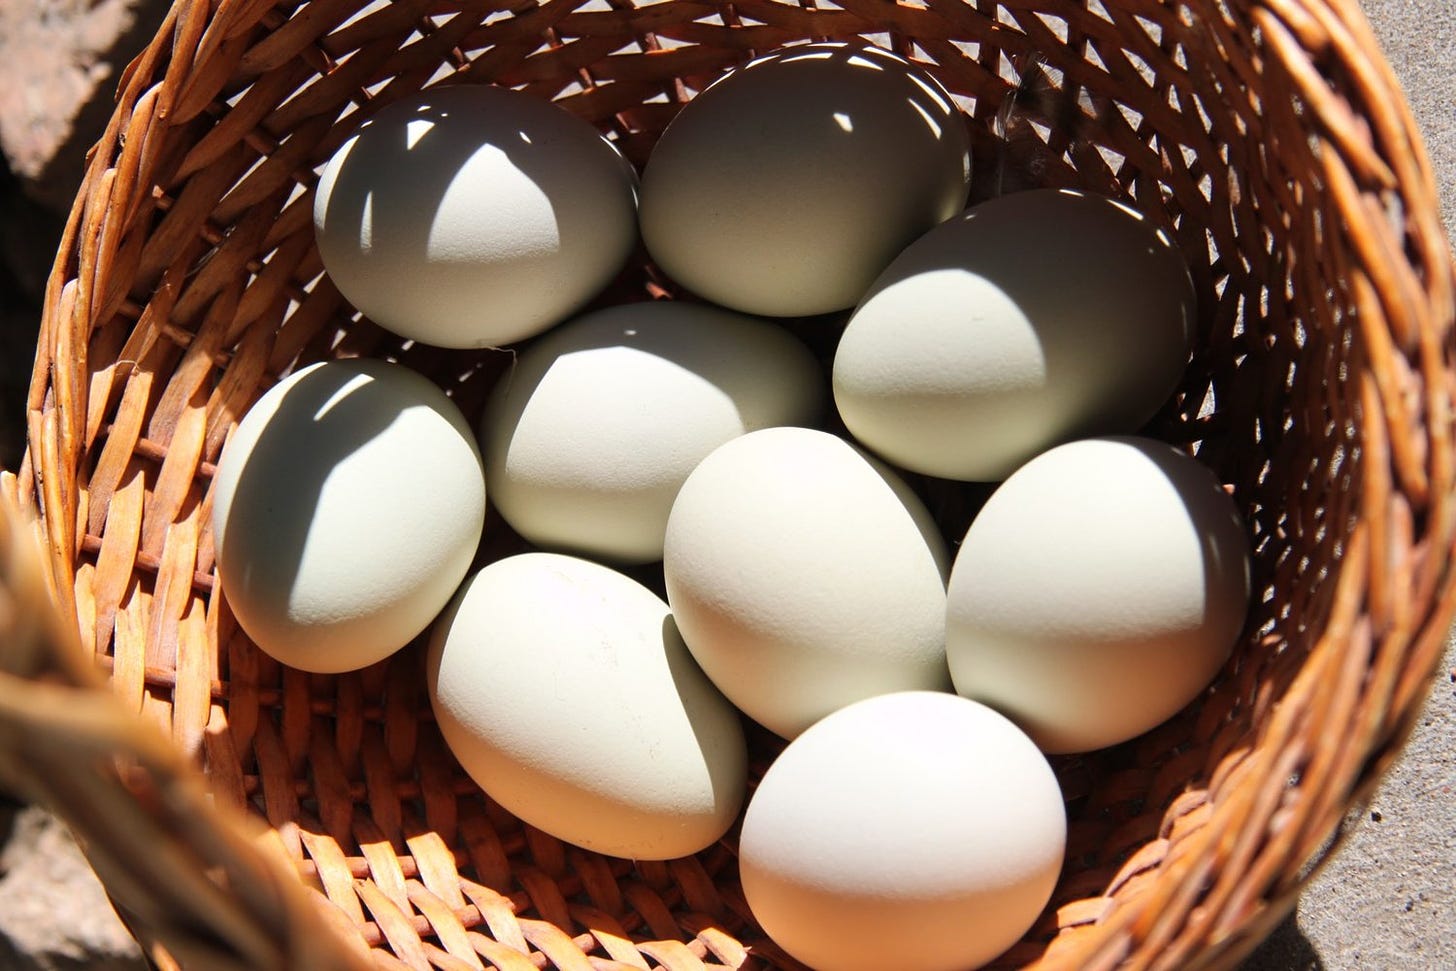 Putting all your eggs in one basket | Amerasia Consulting